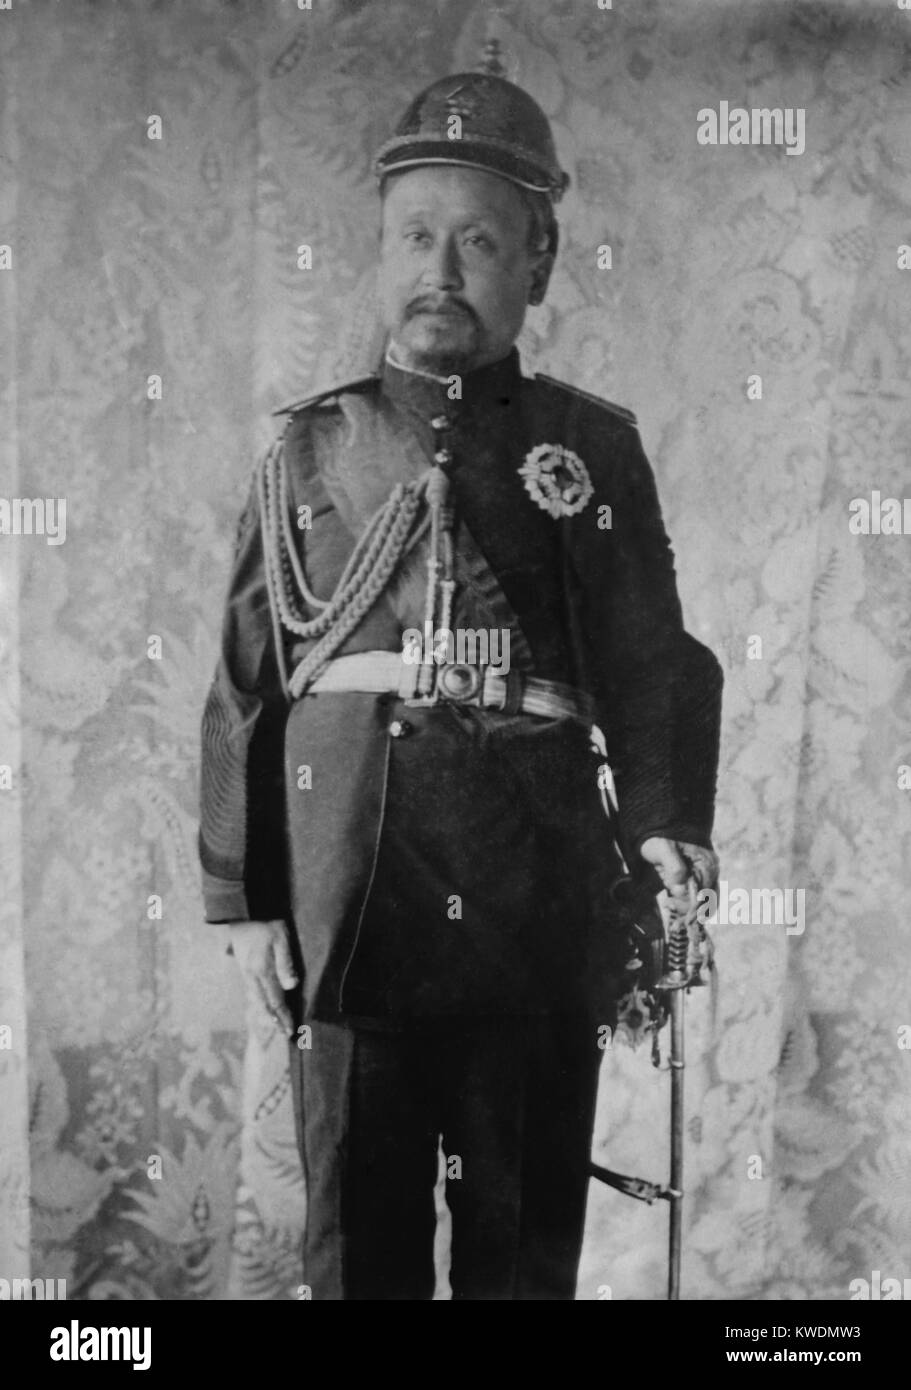 Emperor Gojong of Korea, in uniform in 1904. The Japanese forced his abdication in July 1907, replacing him with his son, Sunjong, as a powerless king. The Japan-Korea Treaty of 1907 brought Korea fully under Japanese governance (BSLOC 2017 18 70) Stock Photo